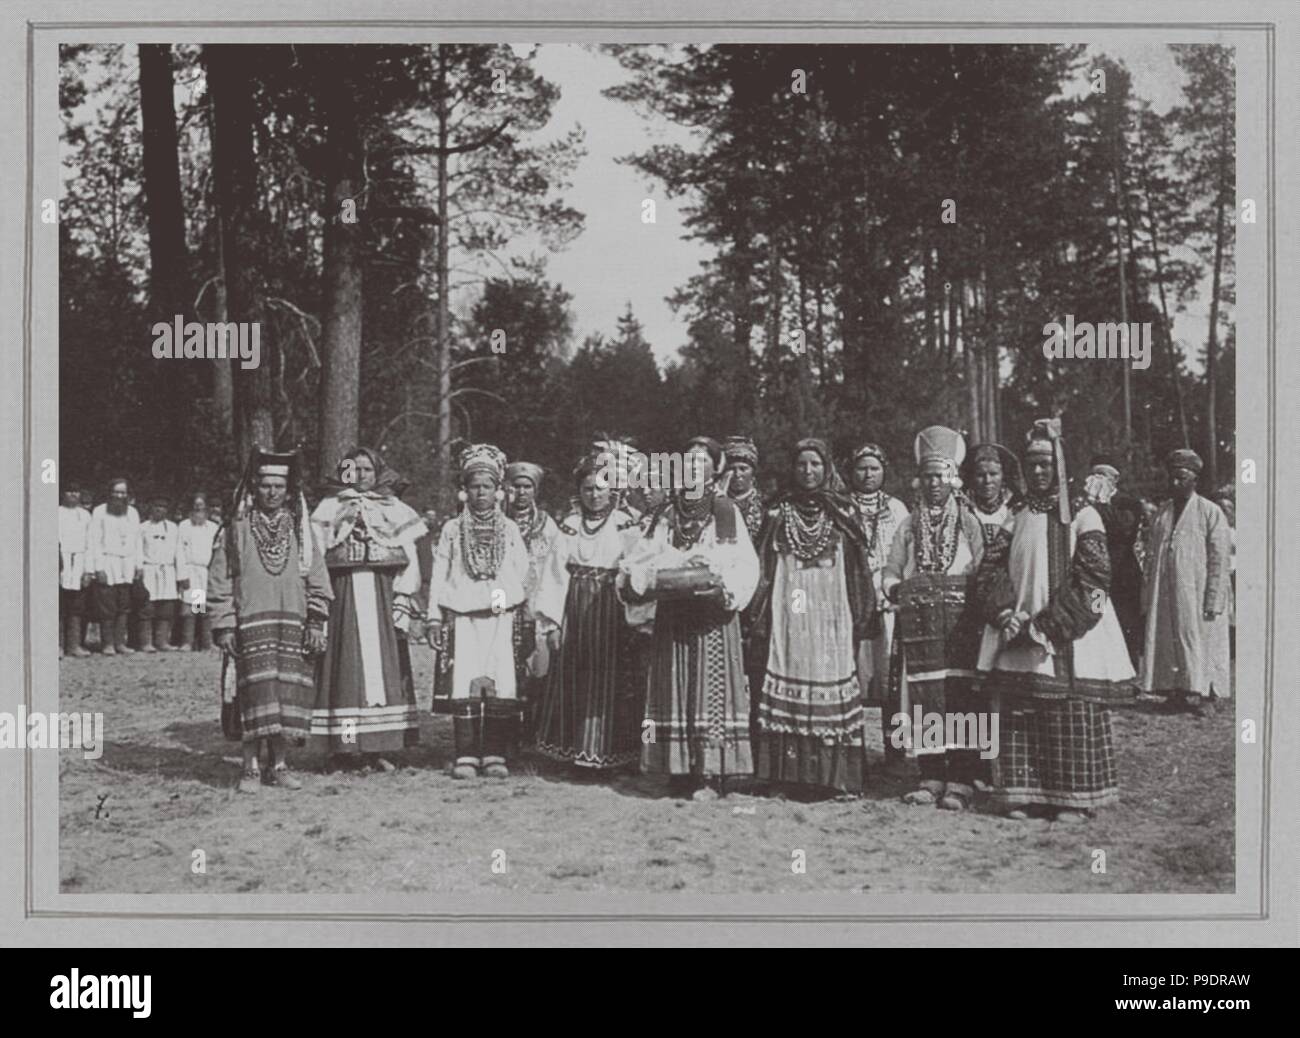 Peasants in festive dress of Tambov region waiting the Tsar Nicholas II. Museum: Institute for the History of Material Culture, St. Petersburg. Stock Photo